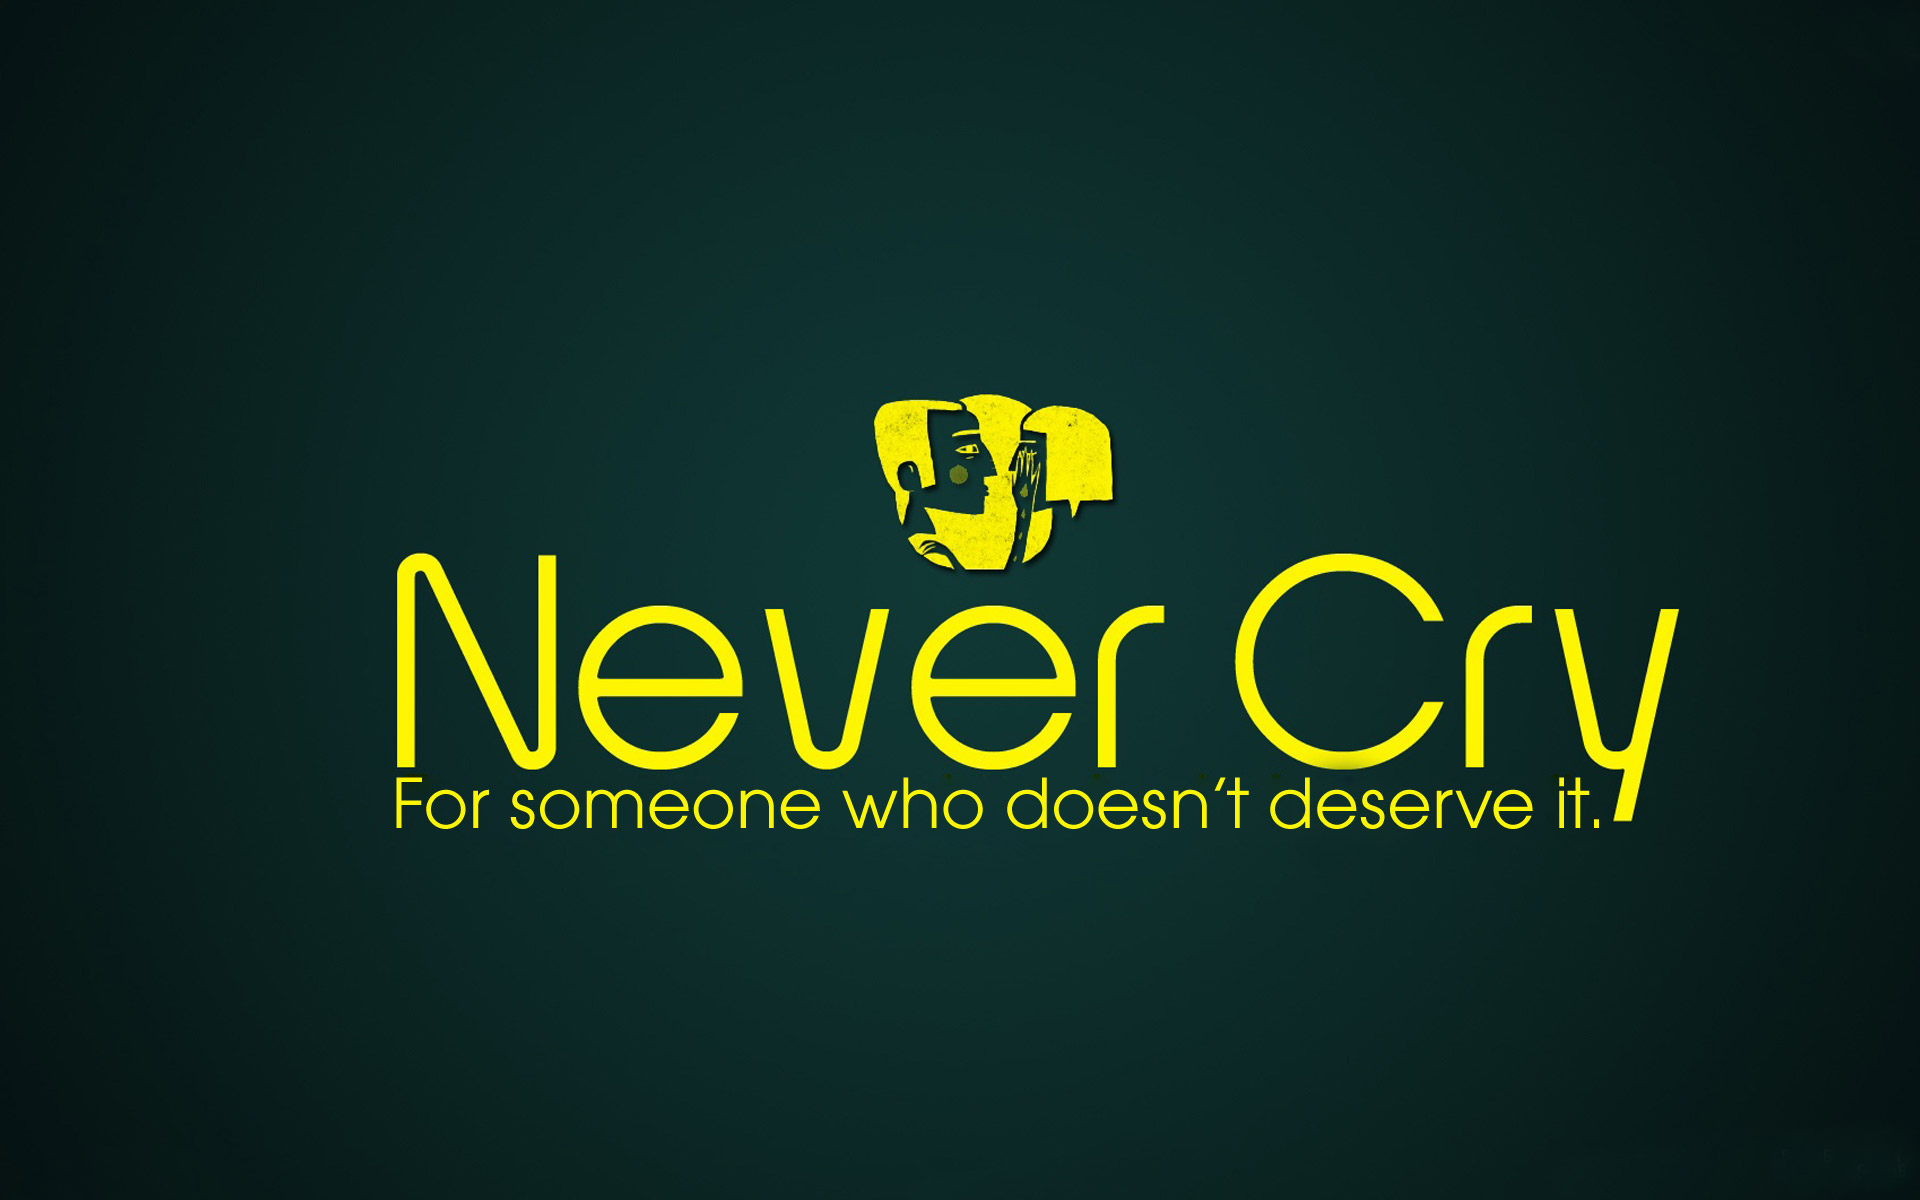 quotes-pictures-hd-never-cry - Best For Desktop HD Wallpapers